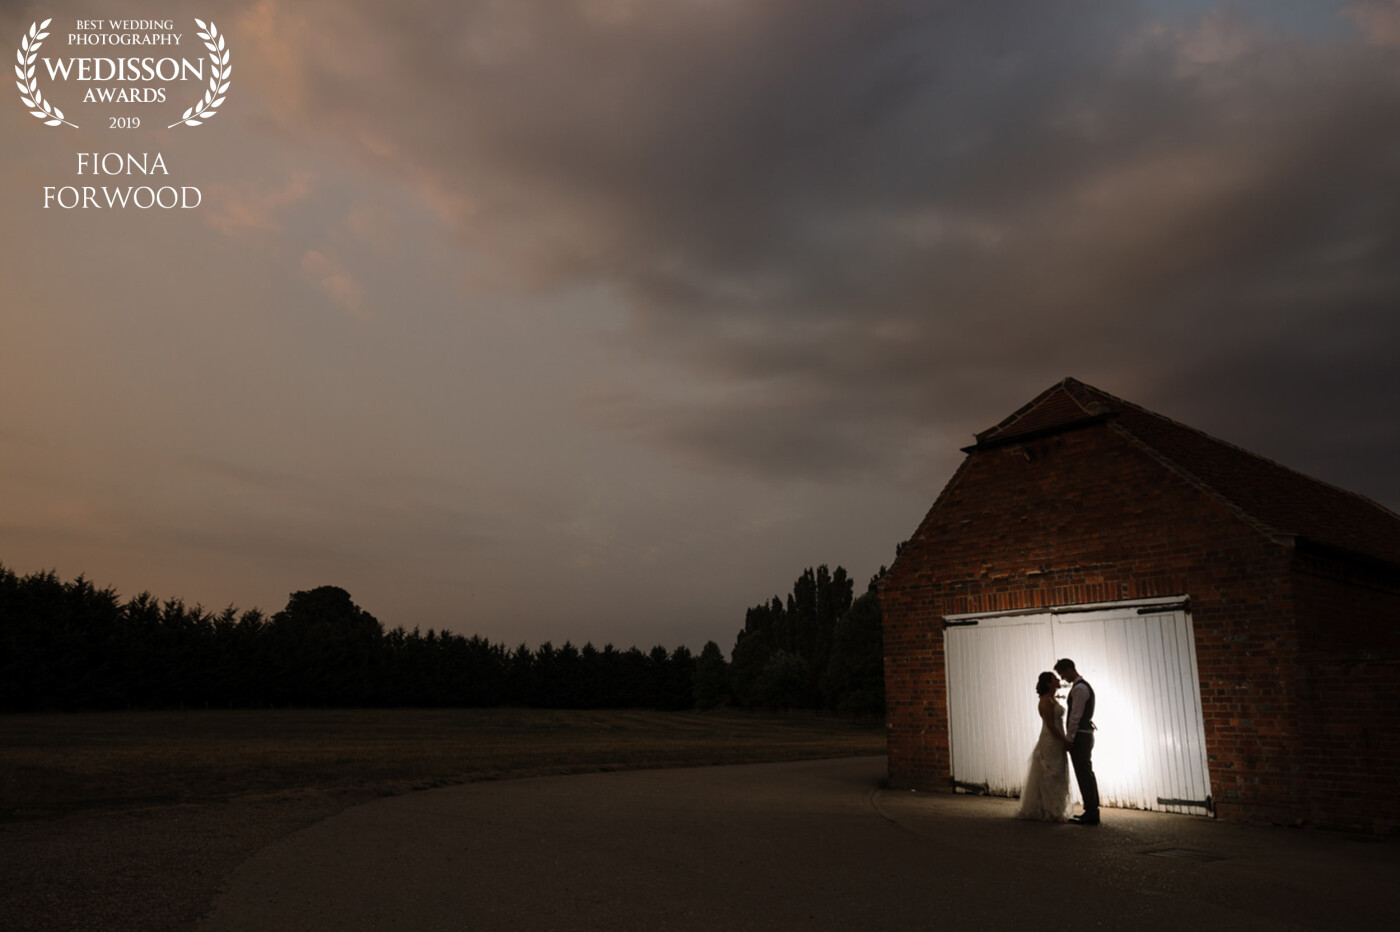 This photo was taken in the evening of a really hot wedding in July at Lillibrooke Manor. The Sky looked pretty and I knew I could do a nice silhouette against the white barn doors. The bride and groom Rosaria and Ben are such a wonderful couple and they were so up for coming away from their evening celebration to get this photo made.